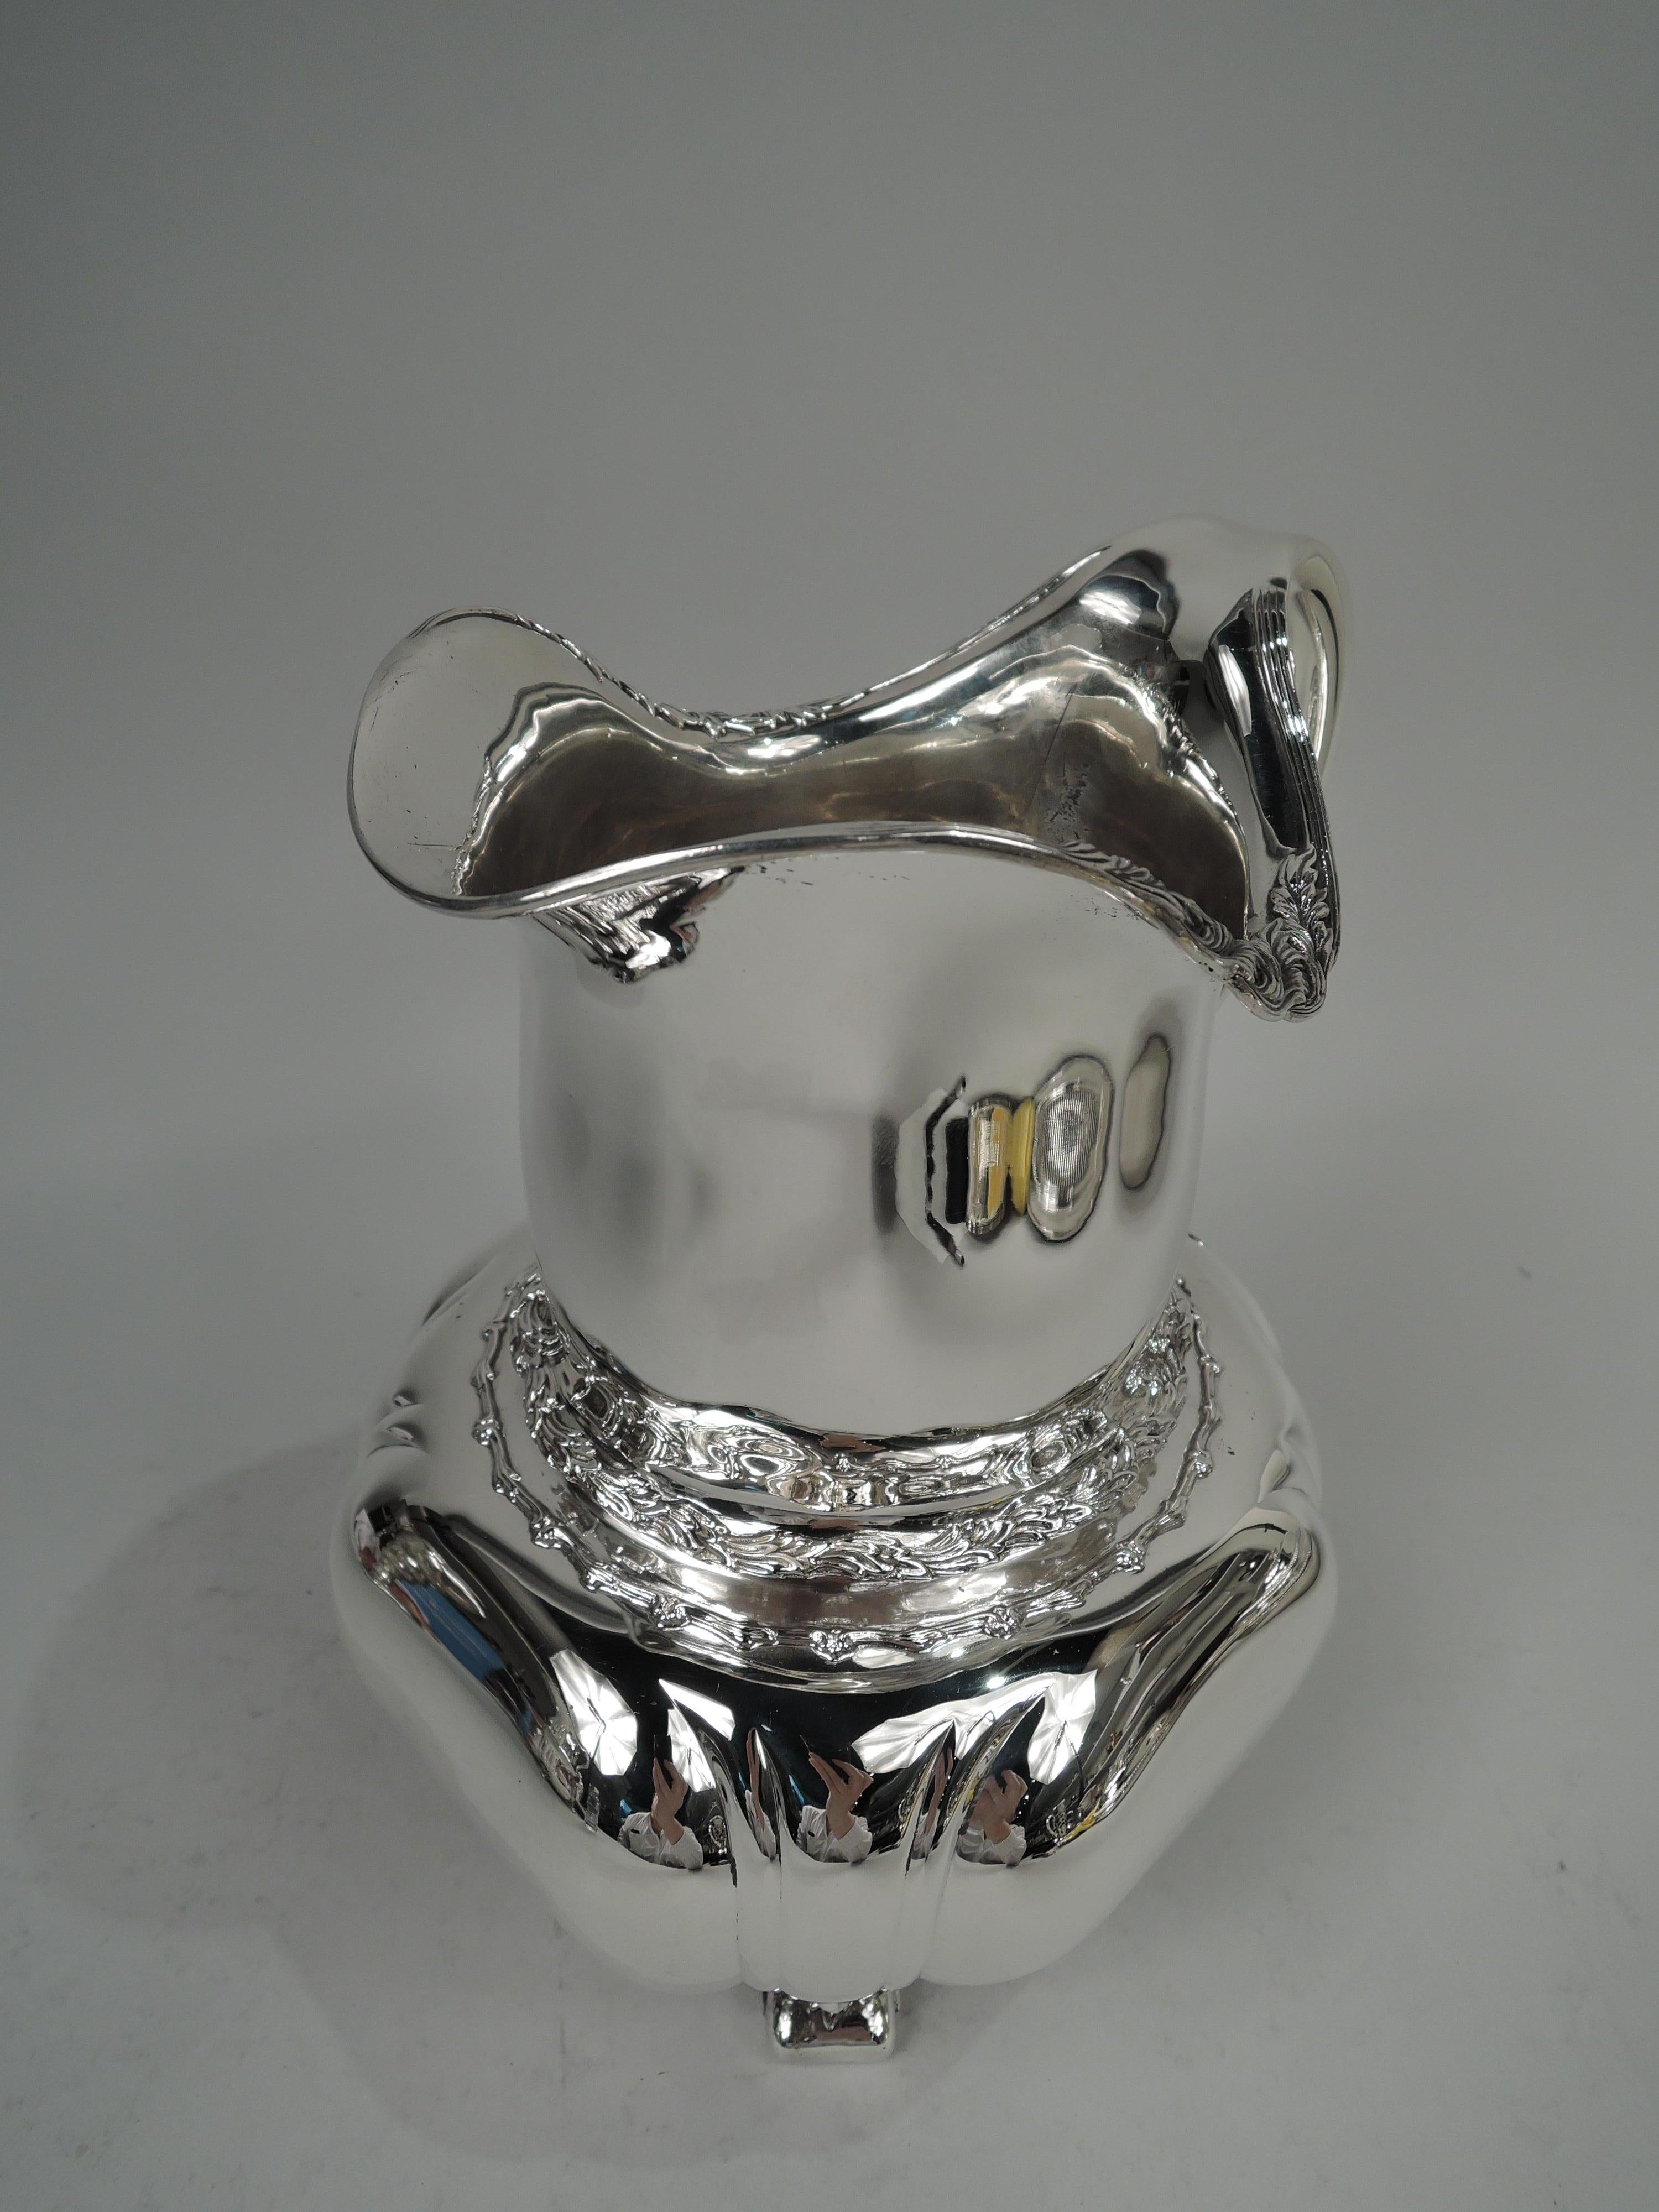 Chrysanthemum sterling silver water pitcher. Made by Tiffany & Co. in New York. Rectilinear shaped bowl with embossed flared tendrils at corners. Gently curved neck and helmet mouth with turned-down rim and scroll handle. Four flat volute supports.